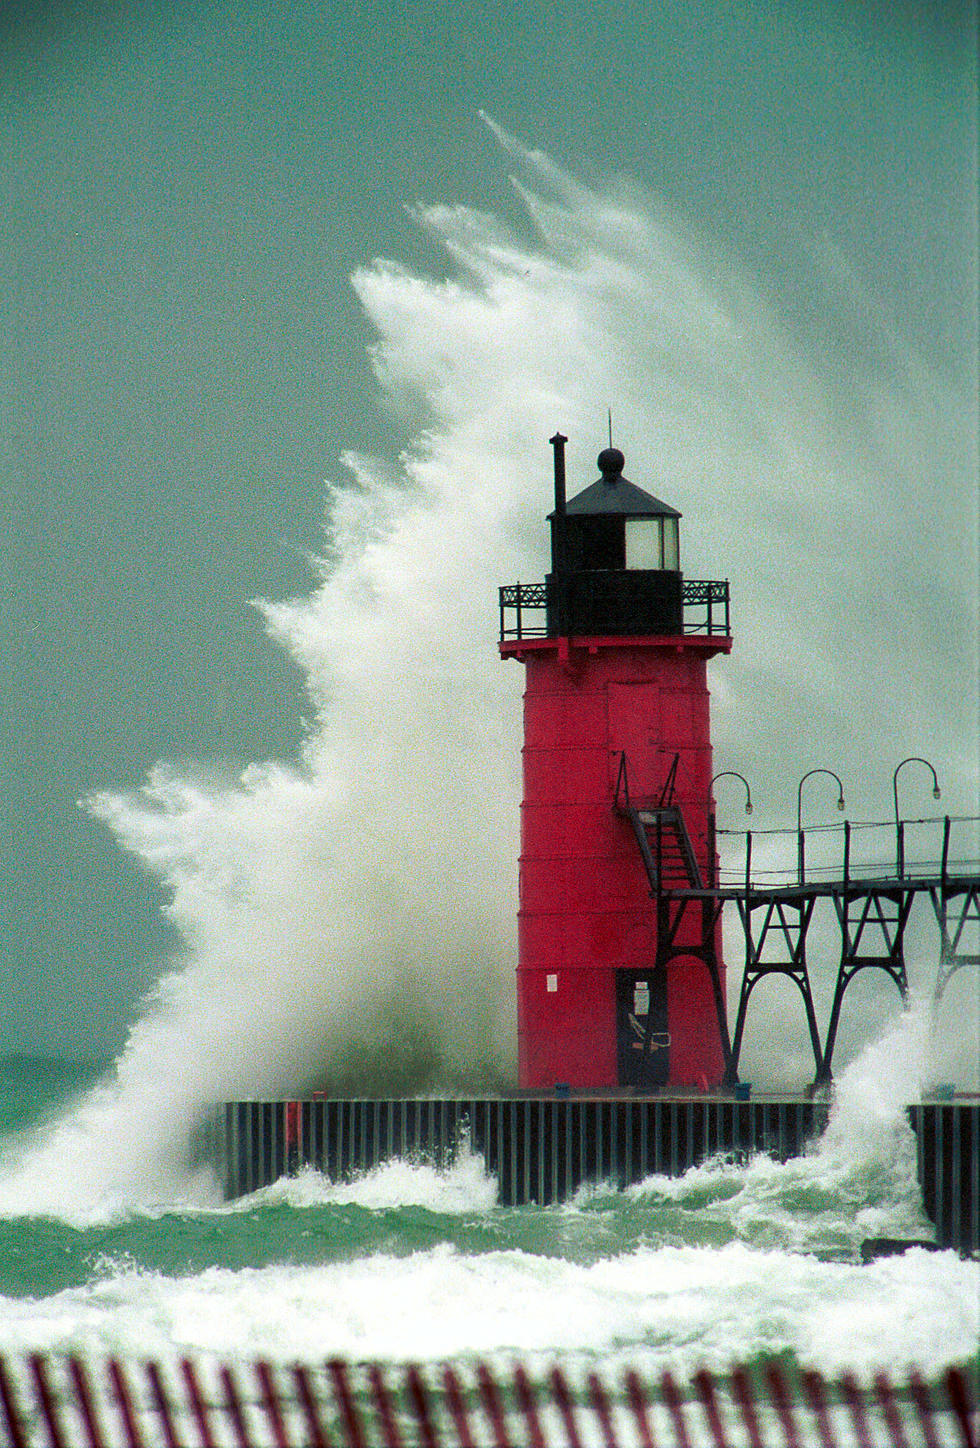 Weather Changes Quickly Approaching Michigan; Boaters Beware